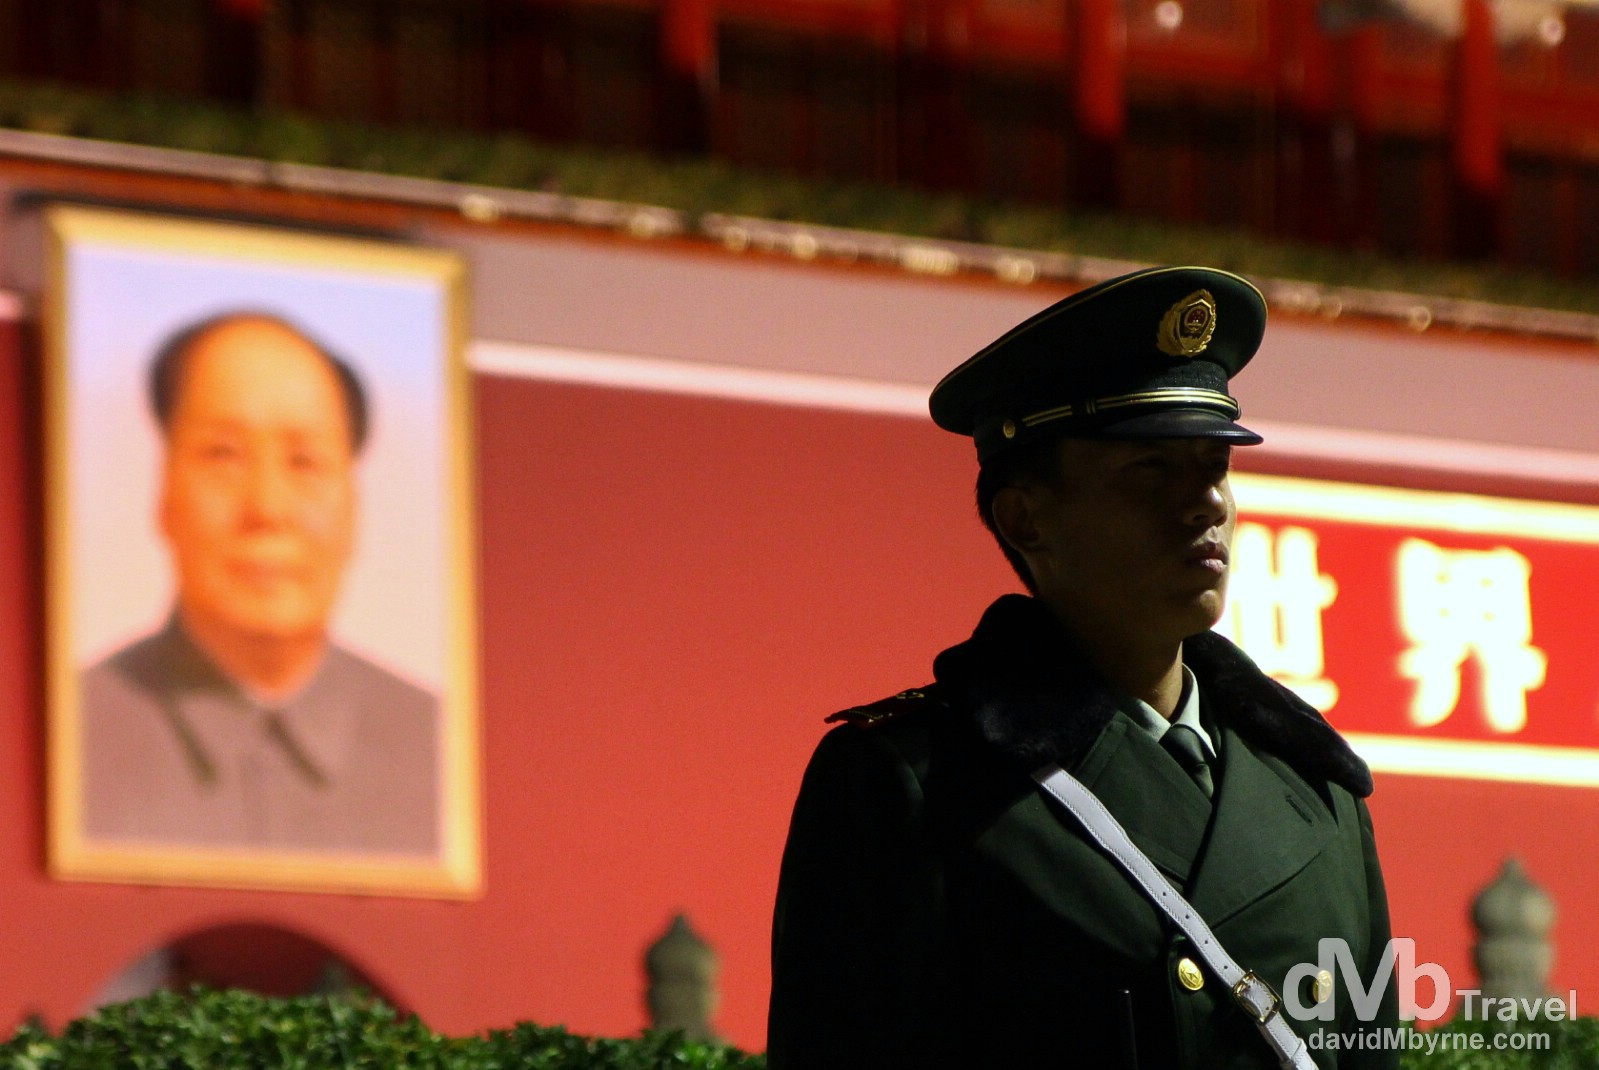 Standing guard outside of Tian'anmen Gate, Beijing, China. October 27th 2012.